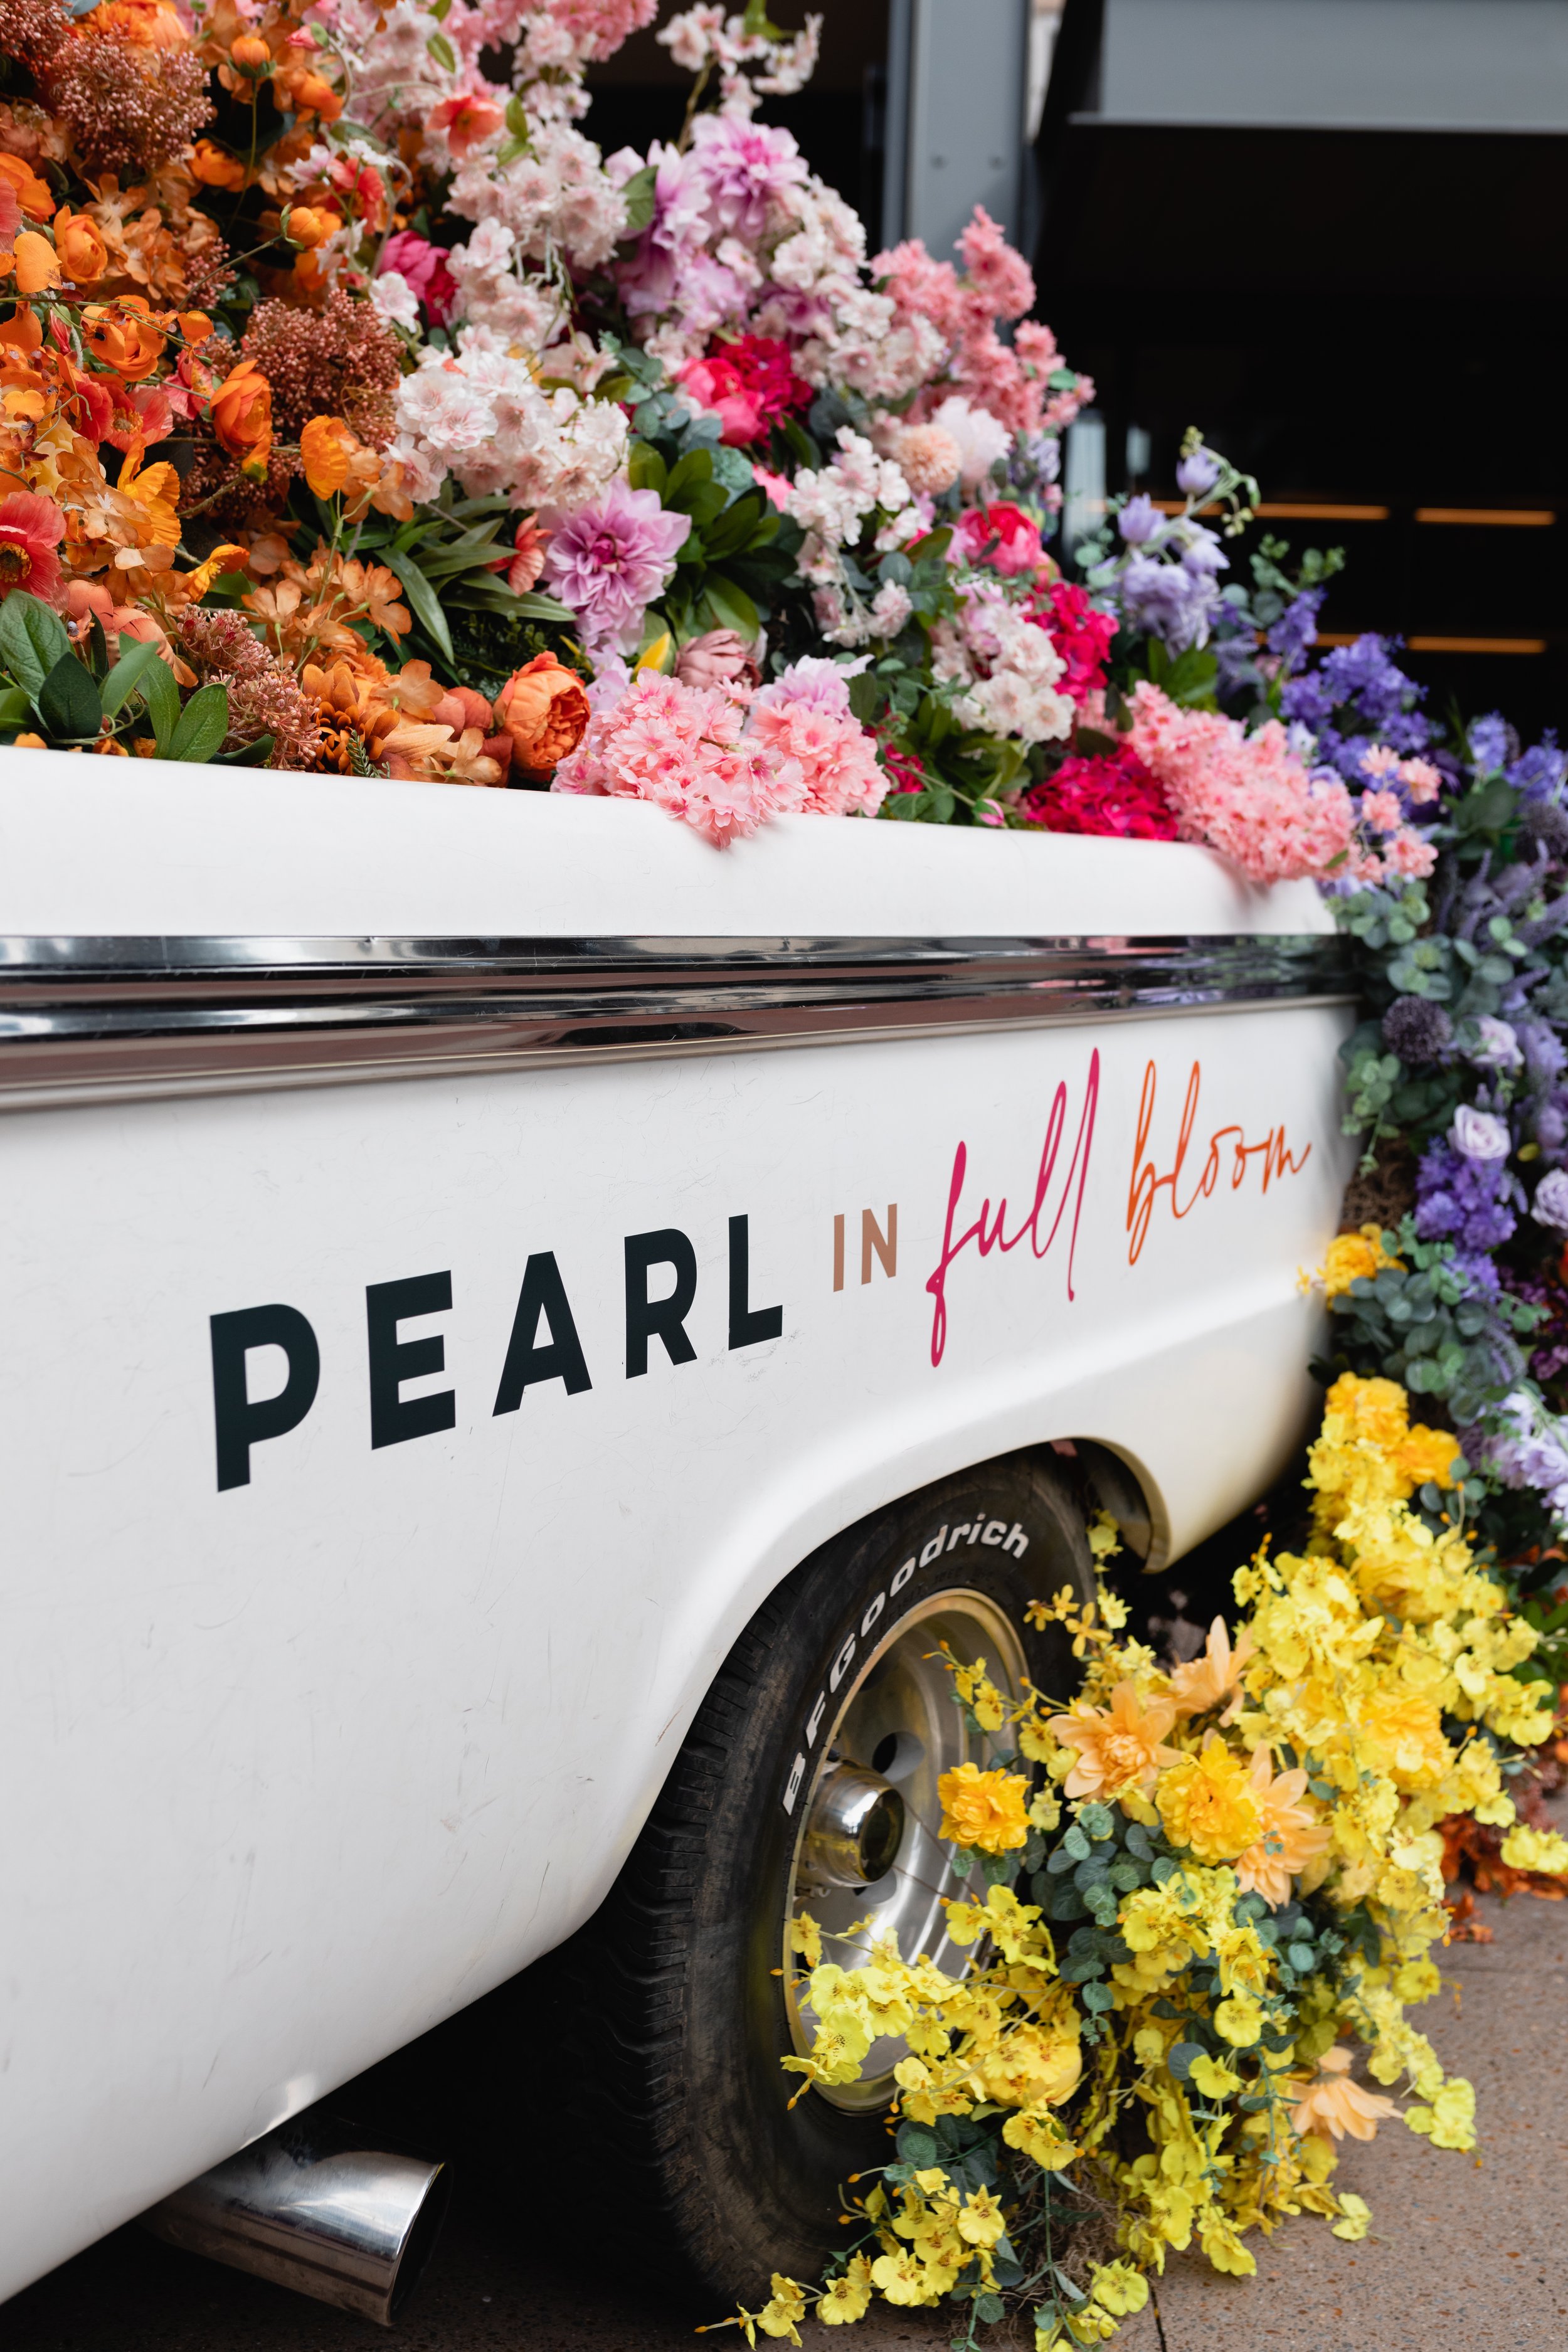 Cheerful pickup truck installation composed of silk floral hues in pink, magenta, lavender, coral, orange, yellow, and mixed greens bring to life this spring Fifth + Broadway event in Nashville, TN. Design by Rosemary and Finch.